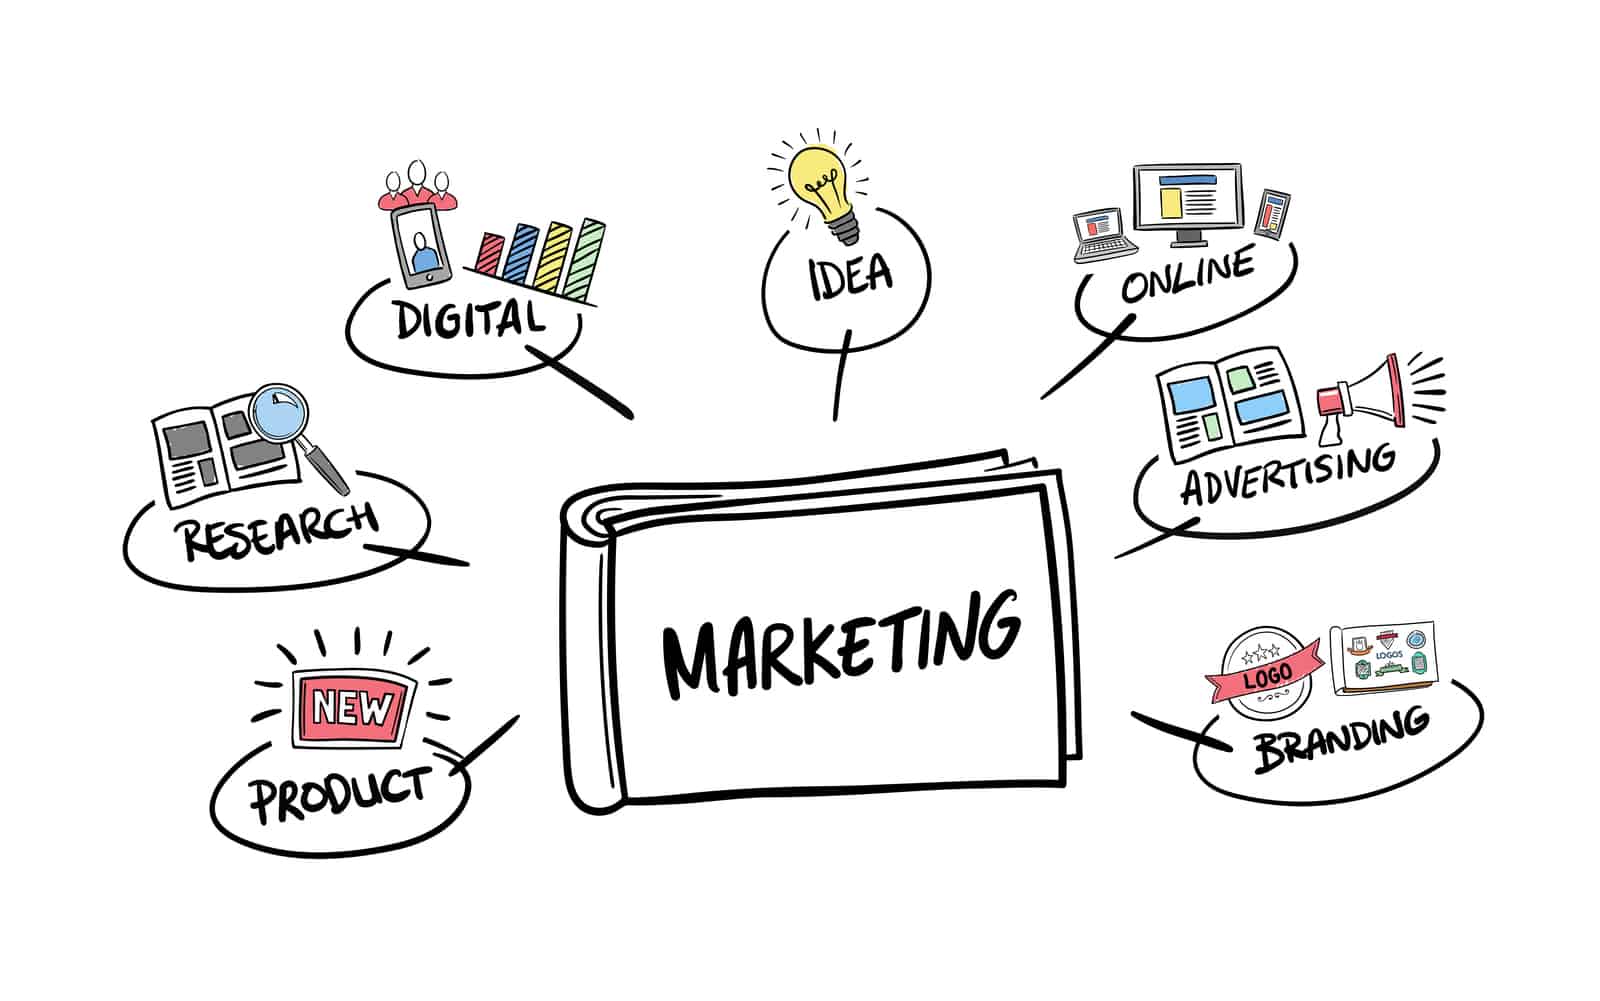 Visualisation of what marketing is